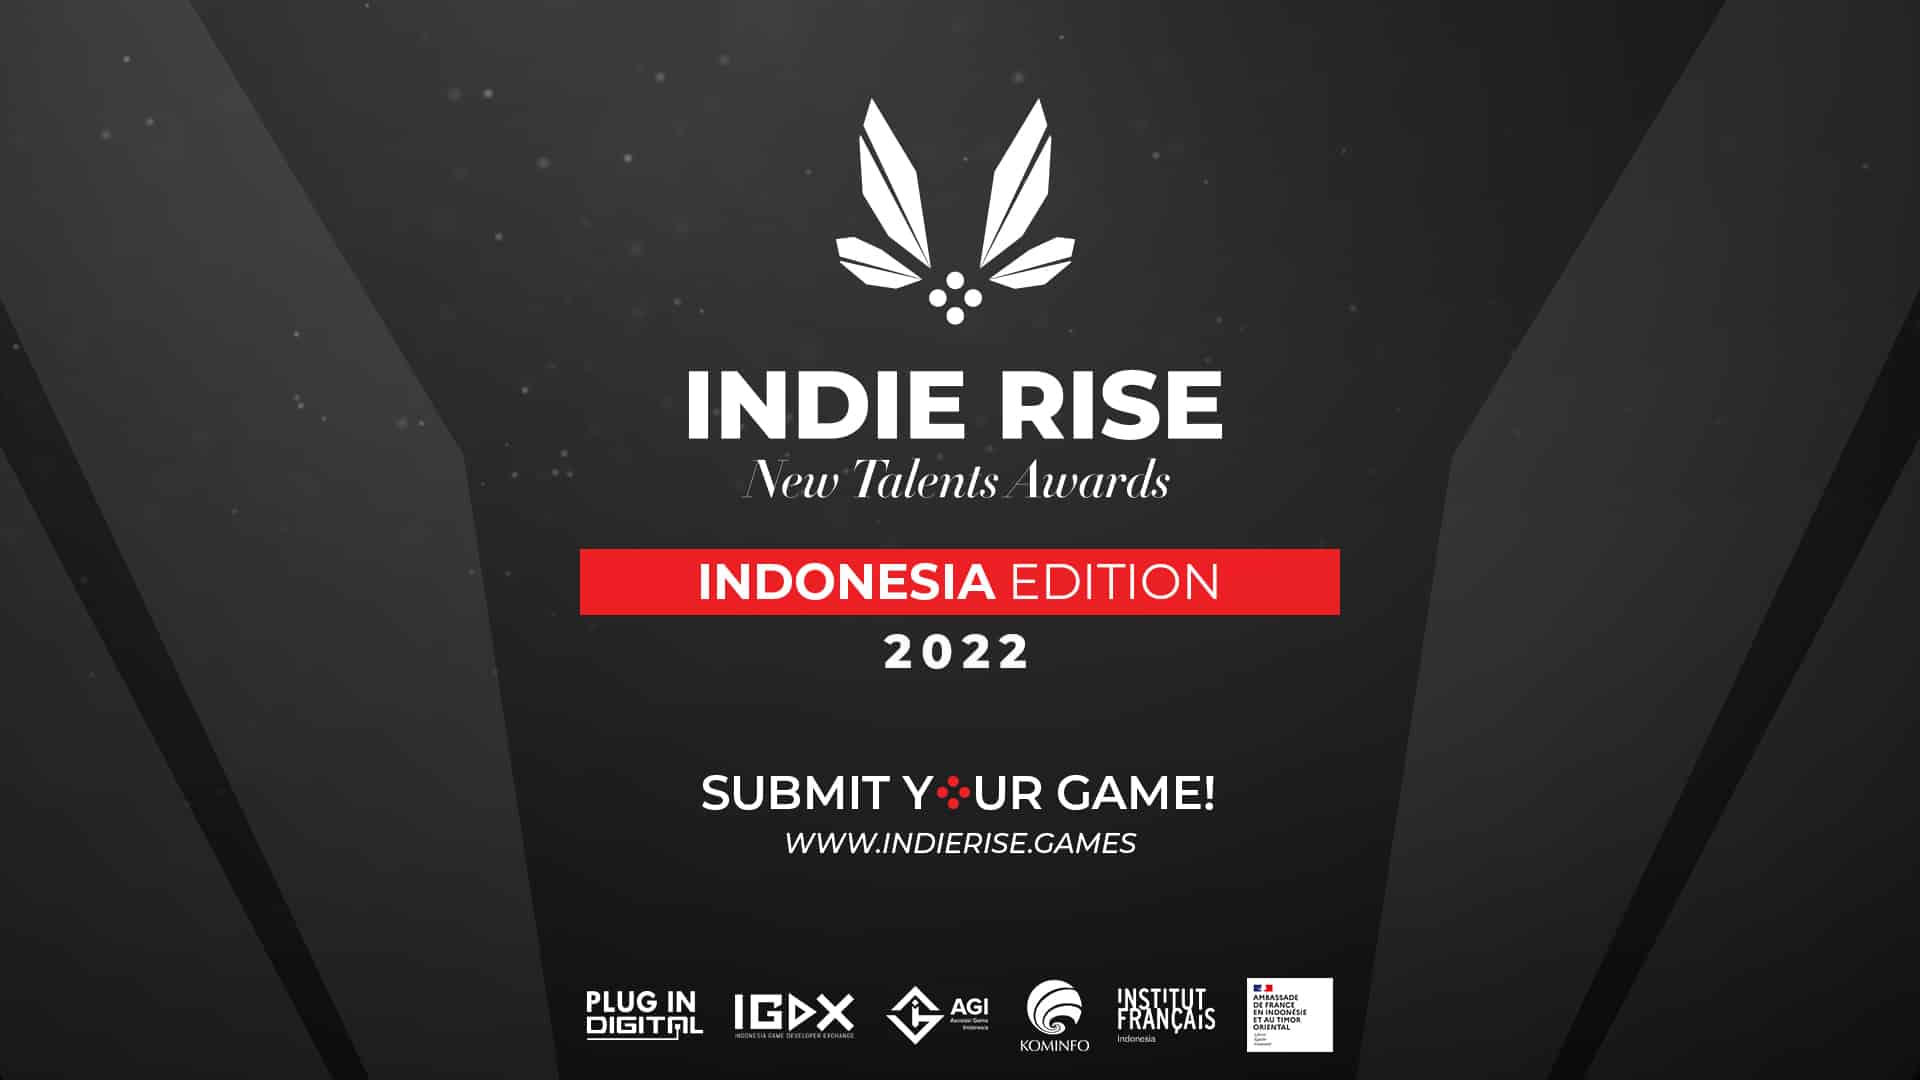 Indie Rise the New Talents Awards